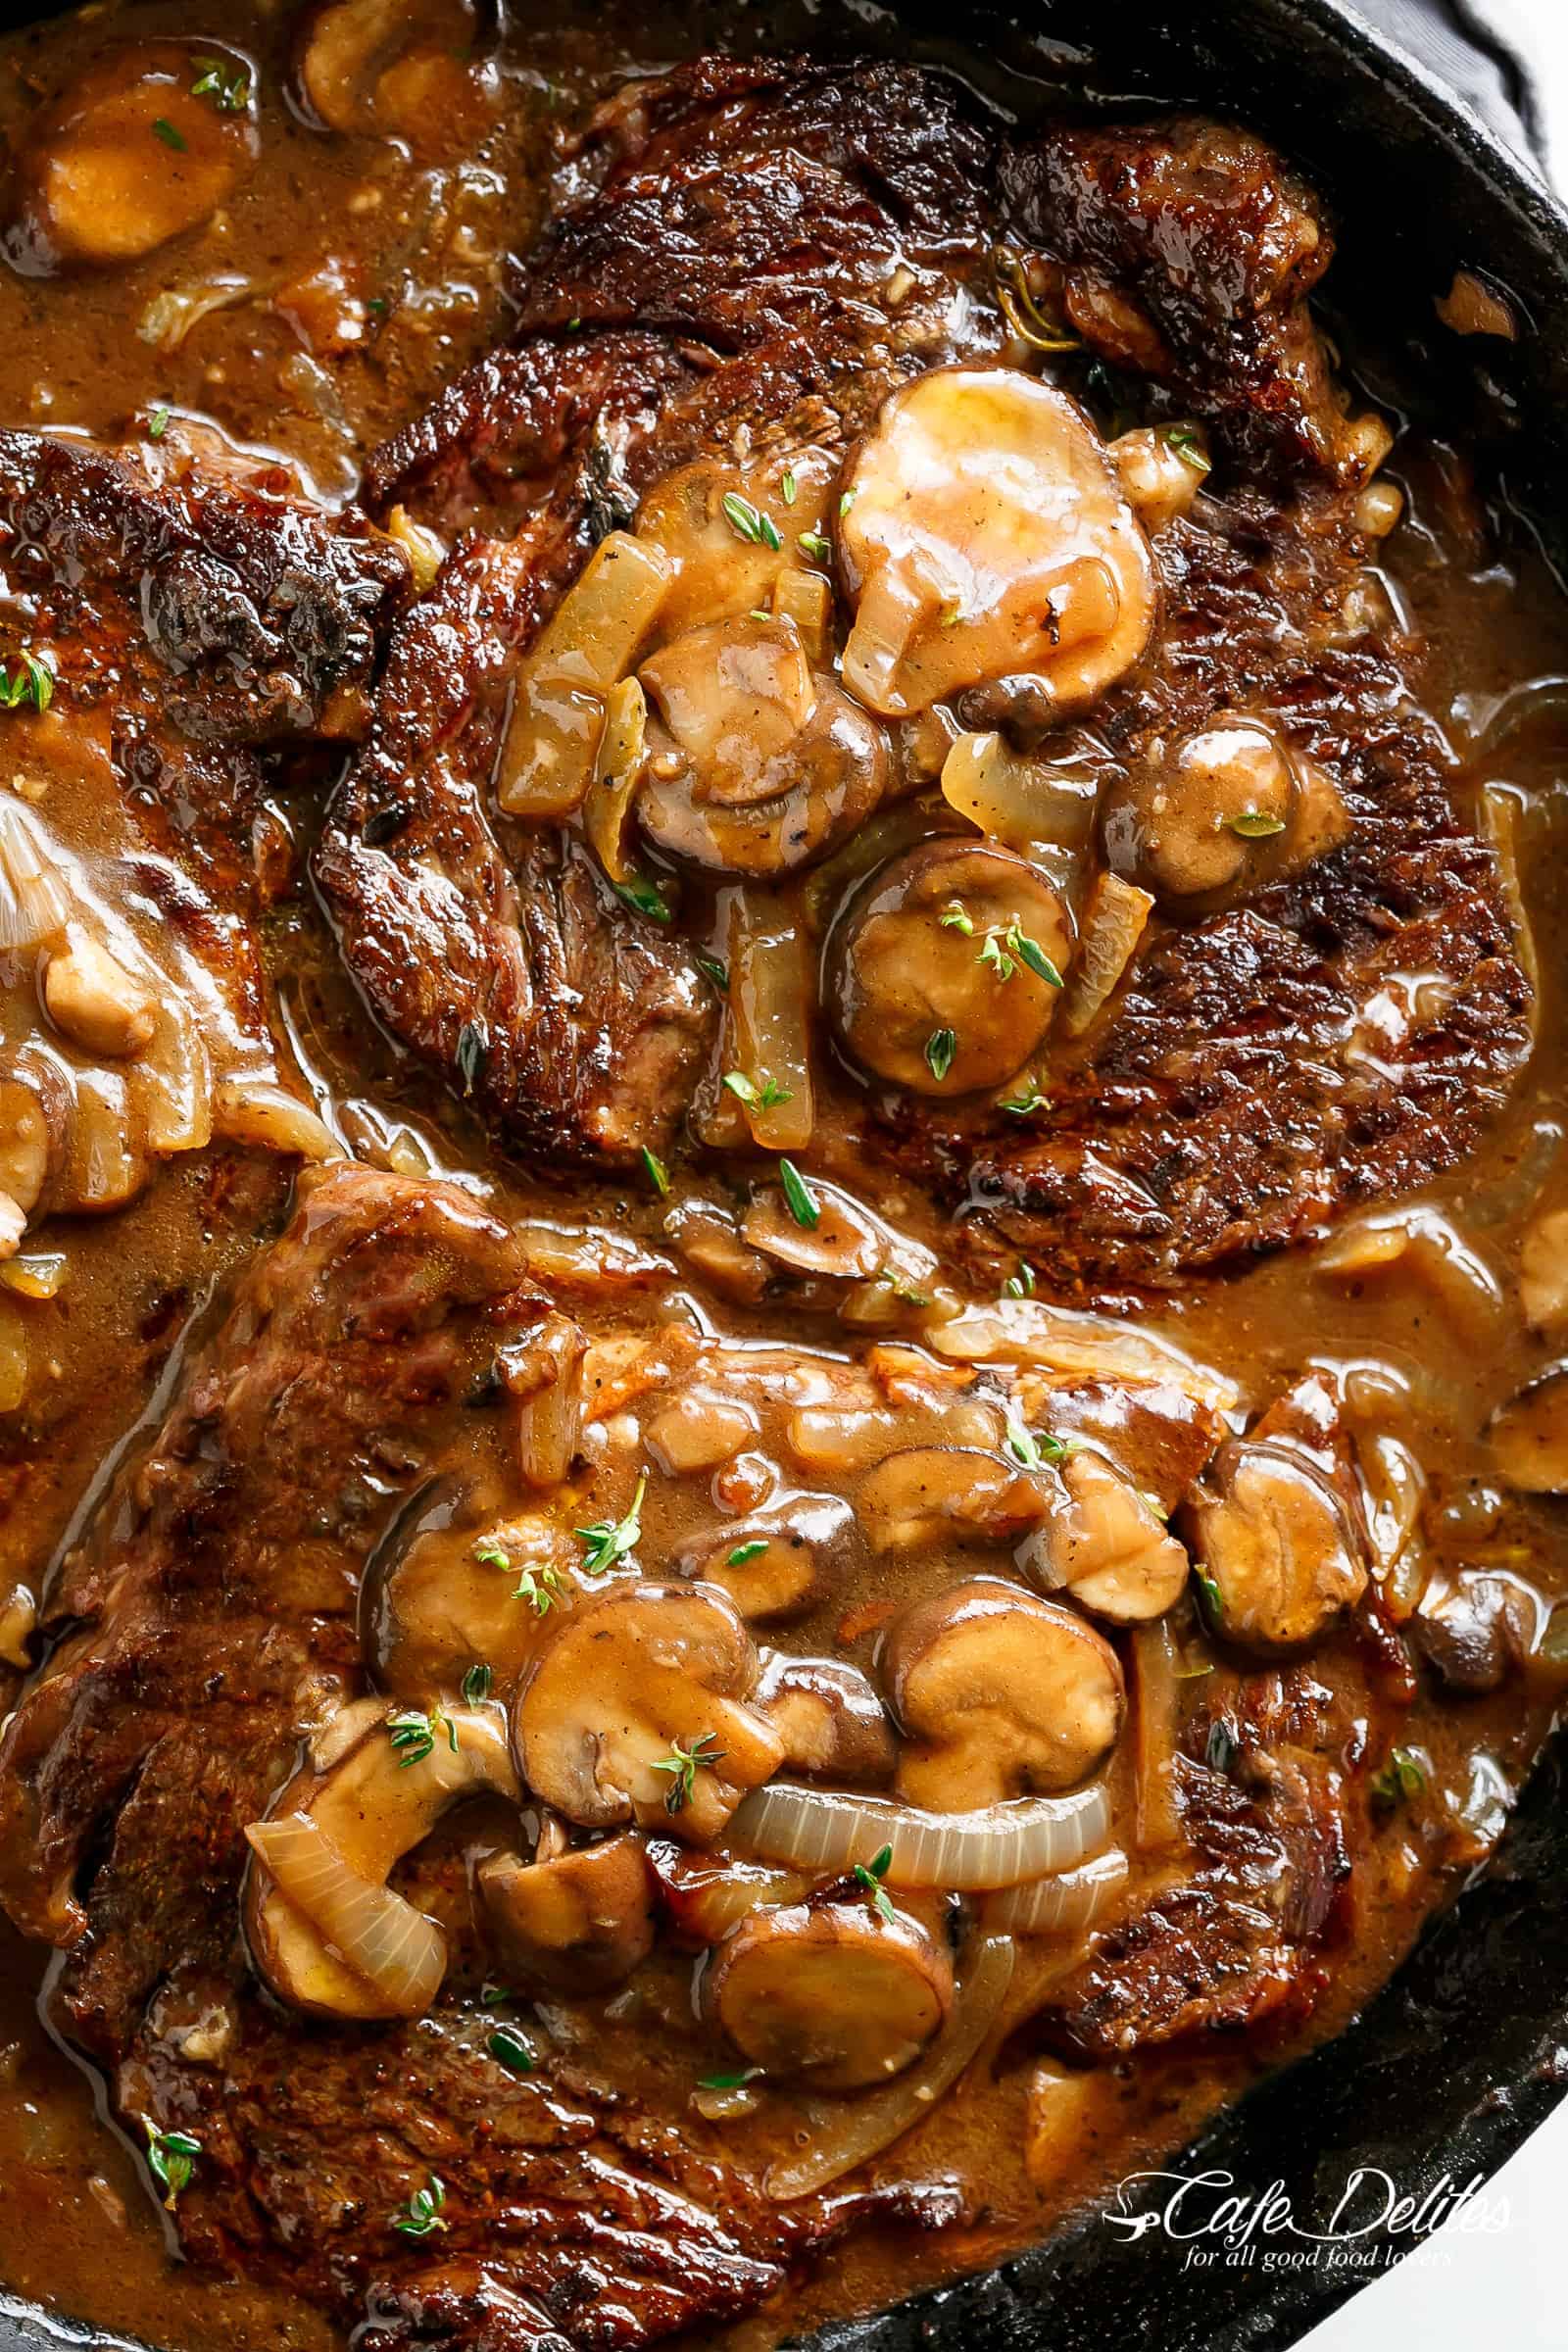 Ribeye Steaks With Mushroom Gravy is simple and delicious! Have dinner served on the table in 15 minutes! | cafedelites.com